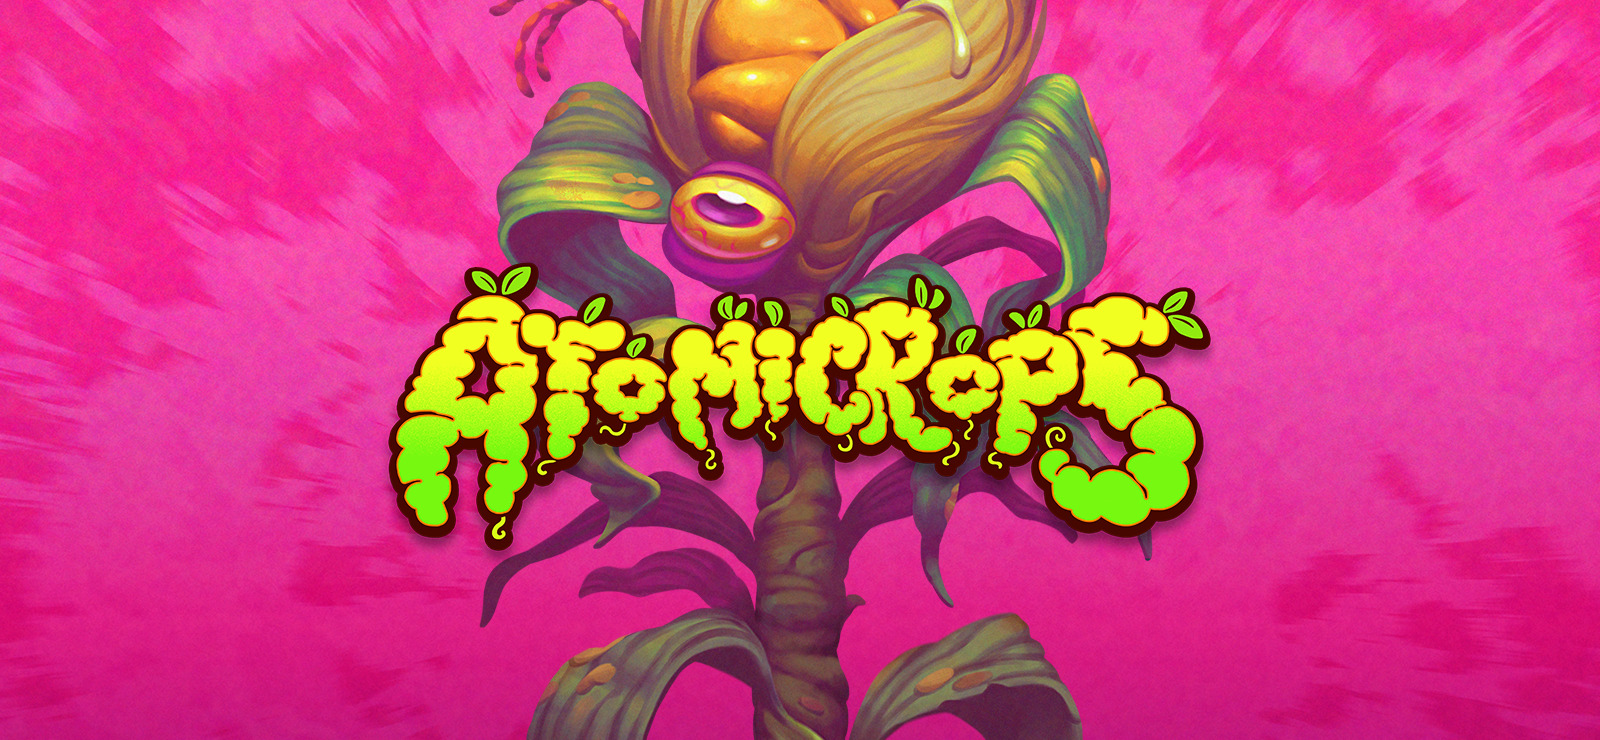 Atomicrops download the new for windows